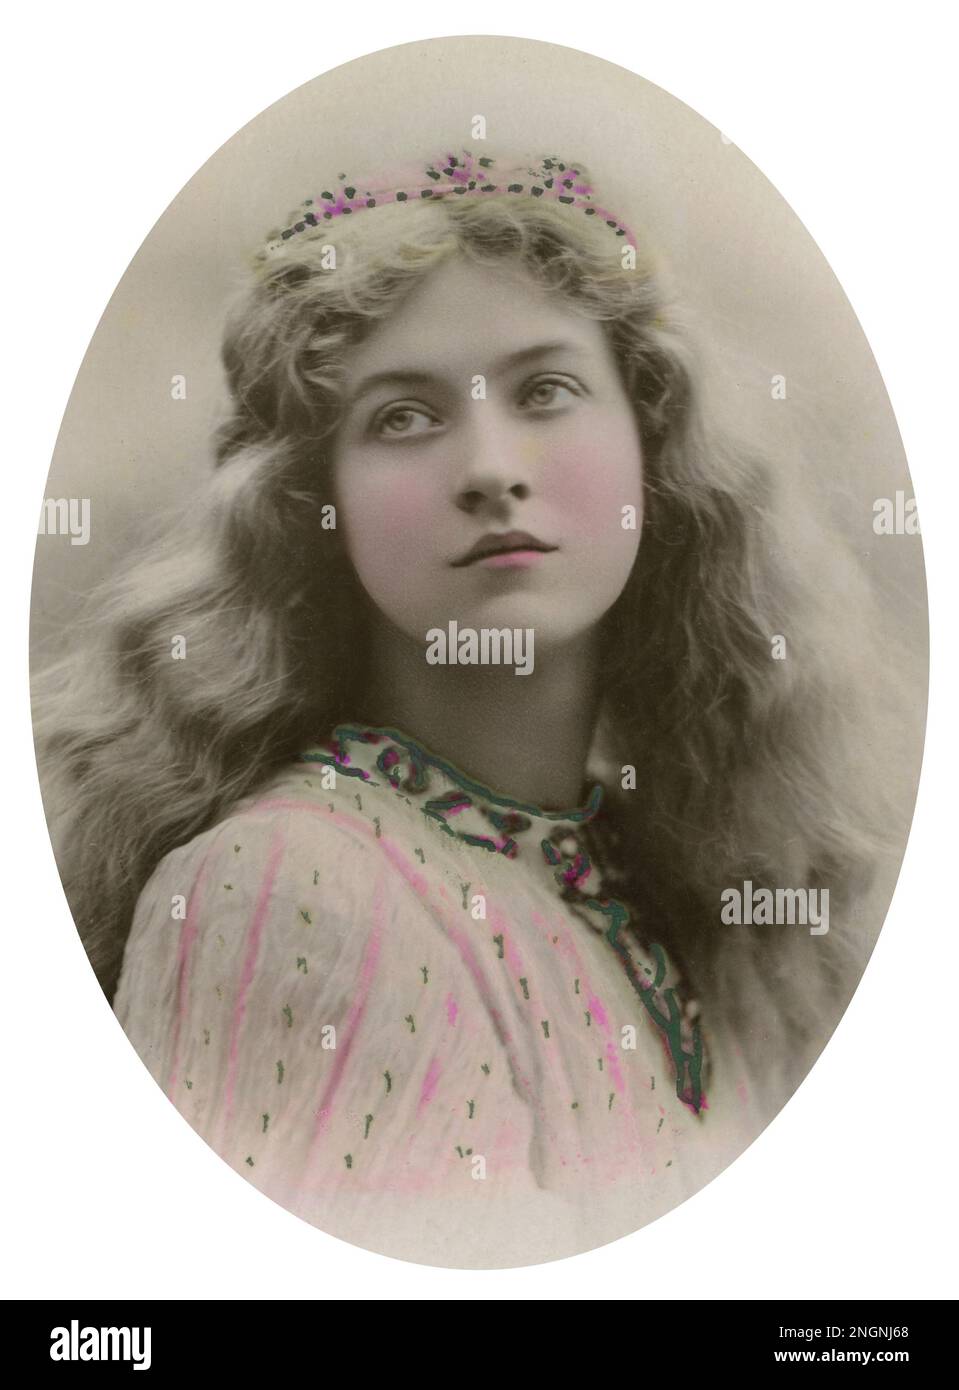 Maude Fealy as 'Fair Rosamund' in 'Becket' - photo by Lallie Charles (London) 1904 or 1905 - restored from original Davidson Brothers Series 1455 postcard, posted 3 Mar 1906 Lancaster England, by Montana Photographer Stock Photo